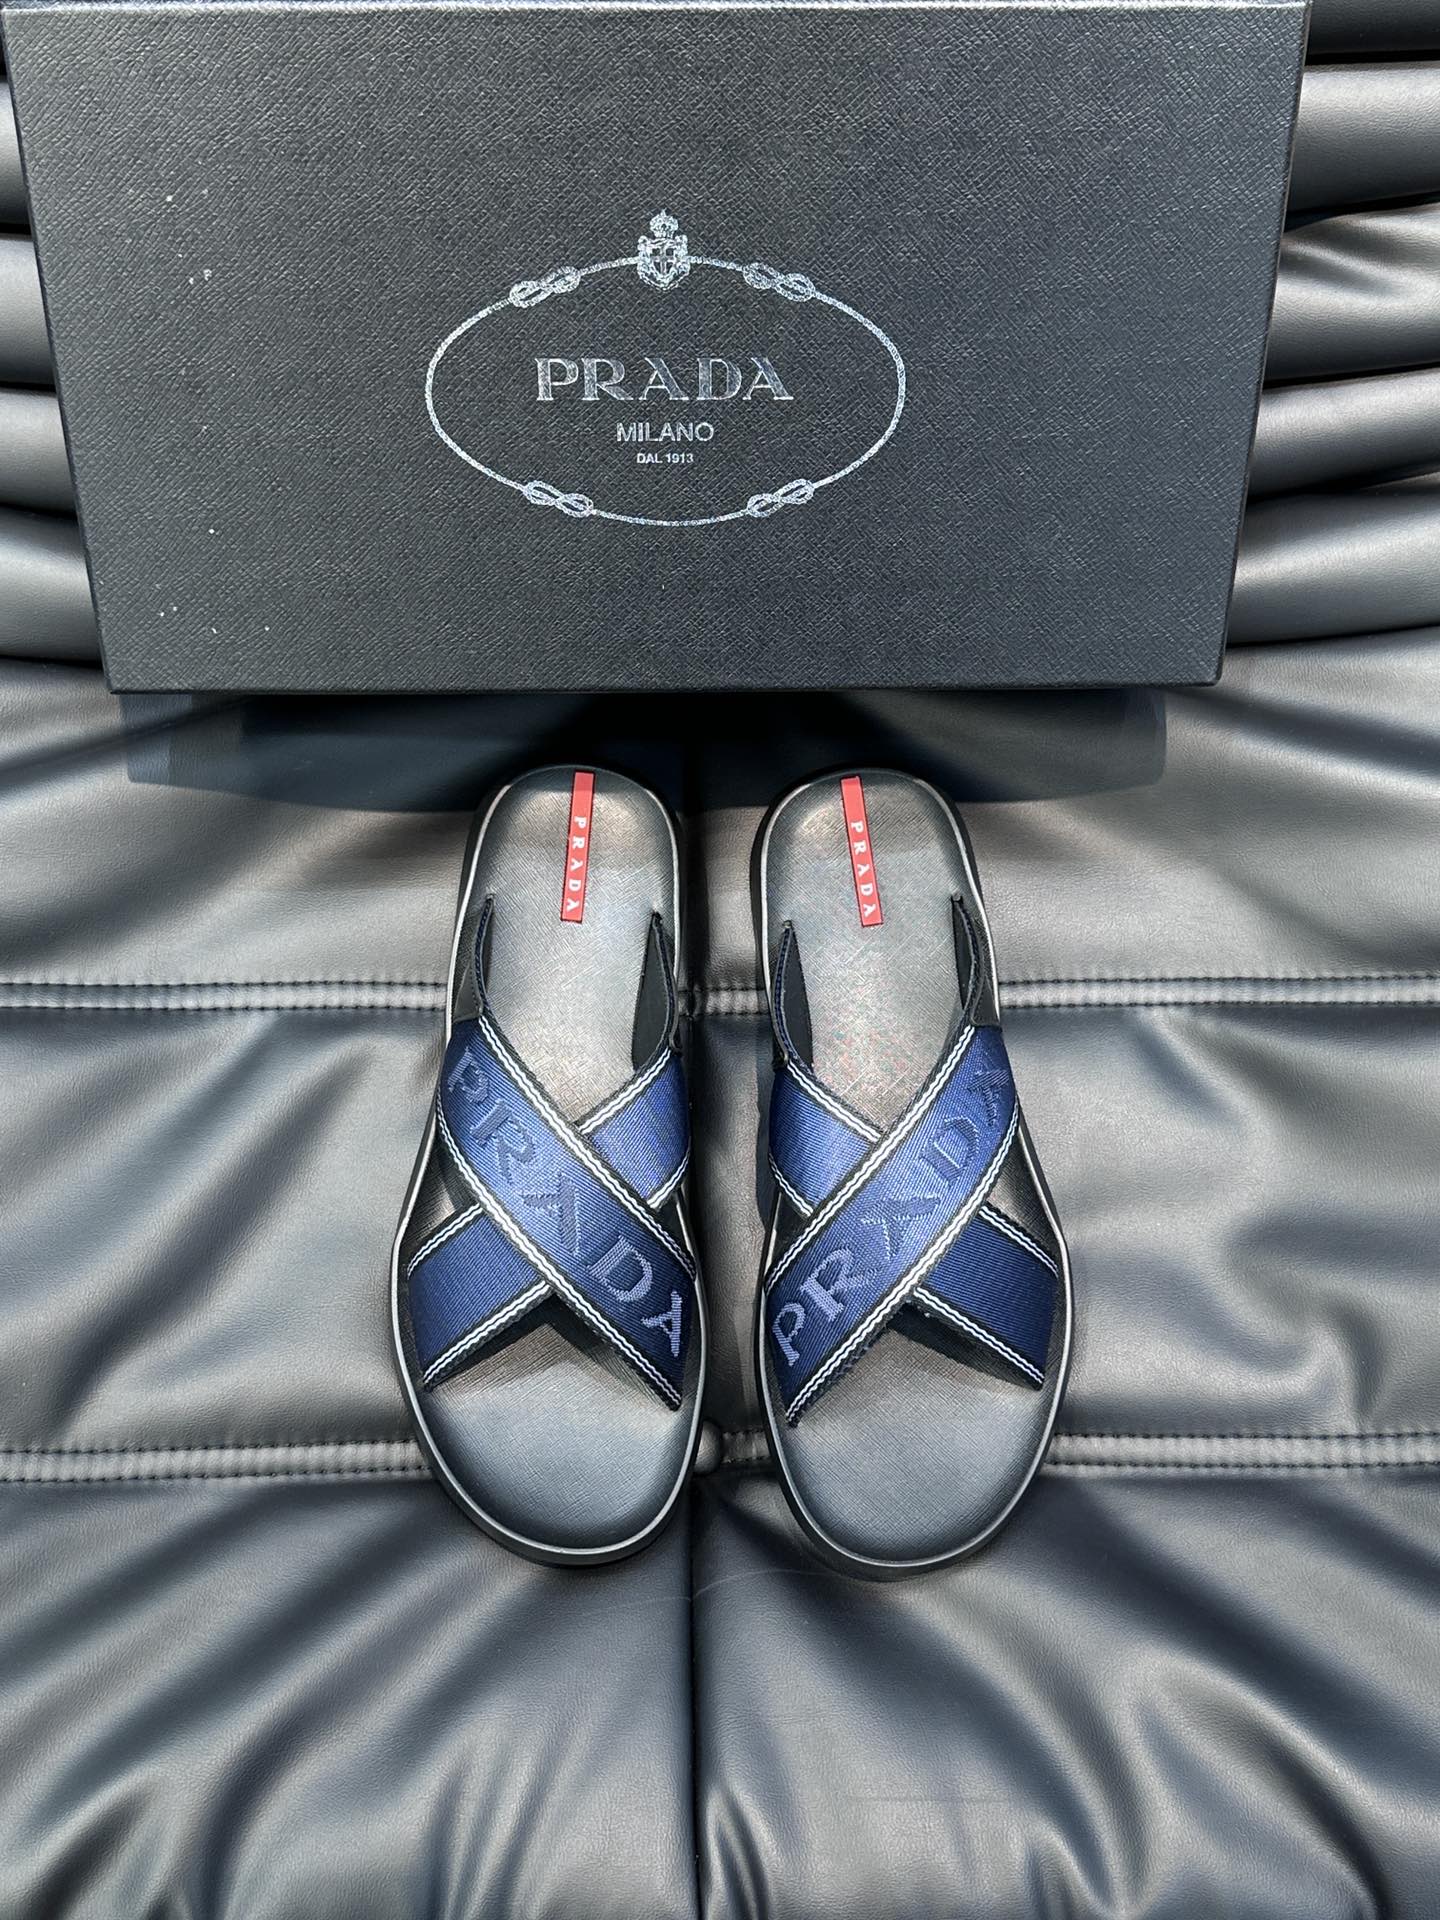 Prada Shoes Sandals Slippers Splicing Men Cowhide Genuine Leather Rubber Summer Collection Casual